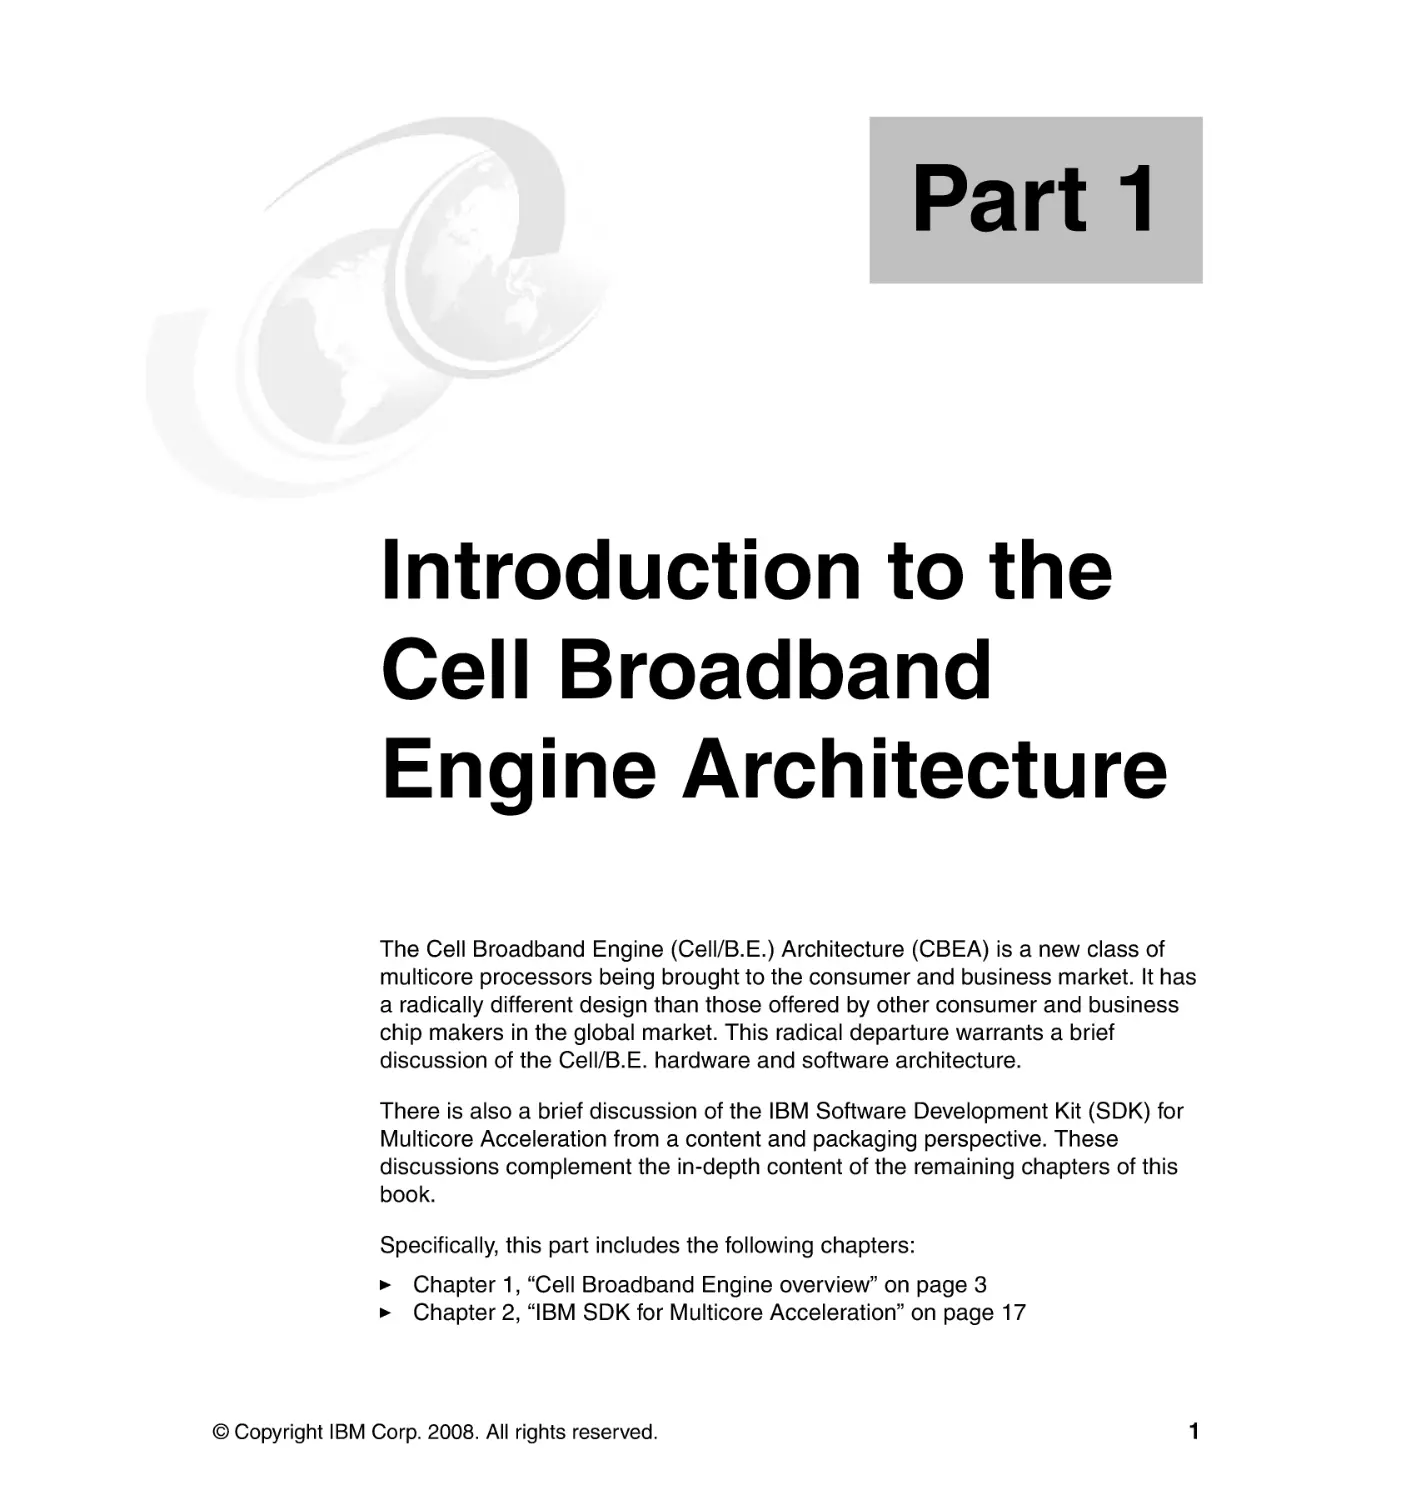 Part 1 Introduction to the Cell Broadband Engine Architecture